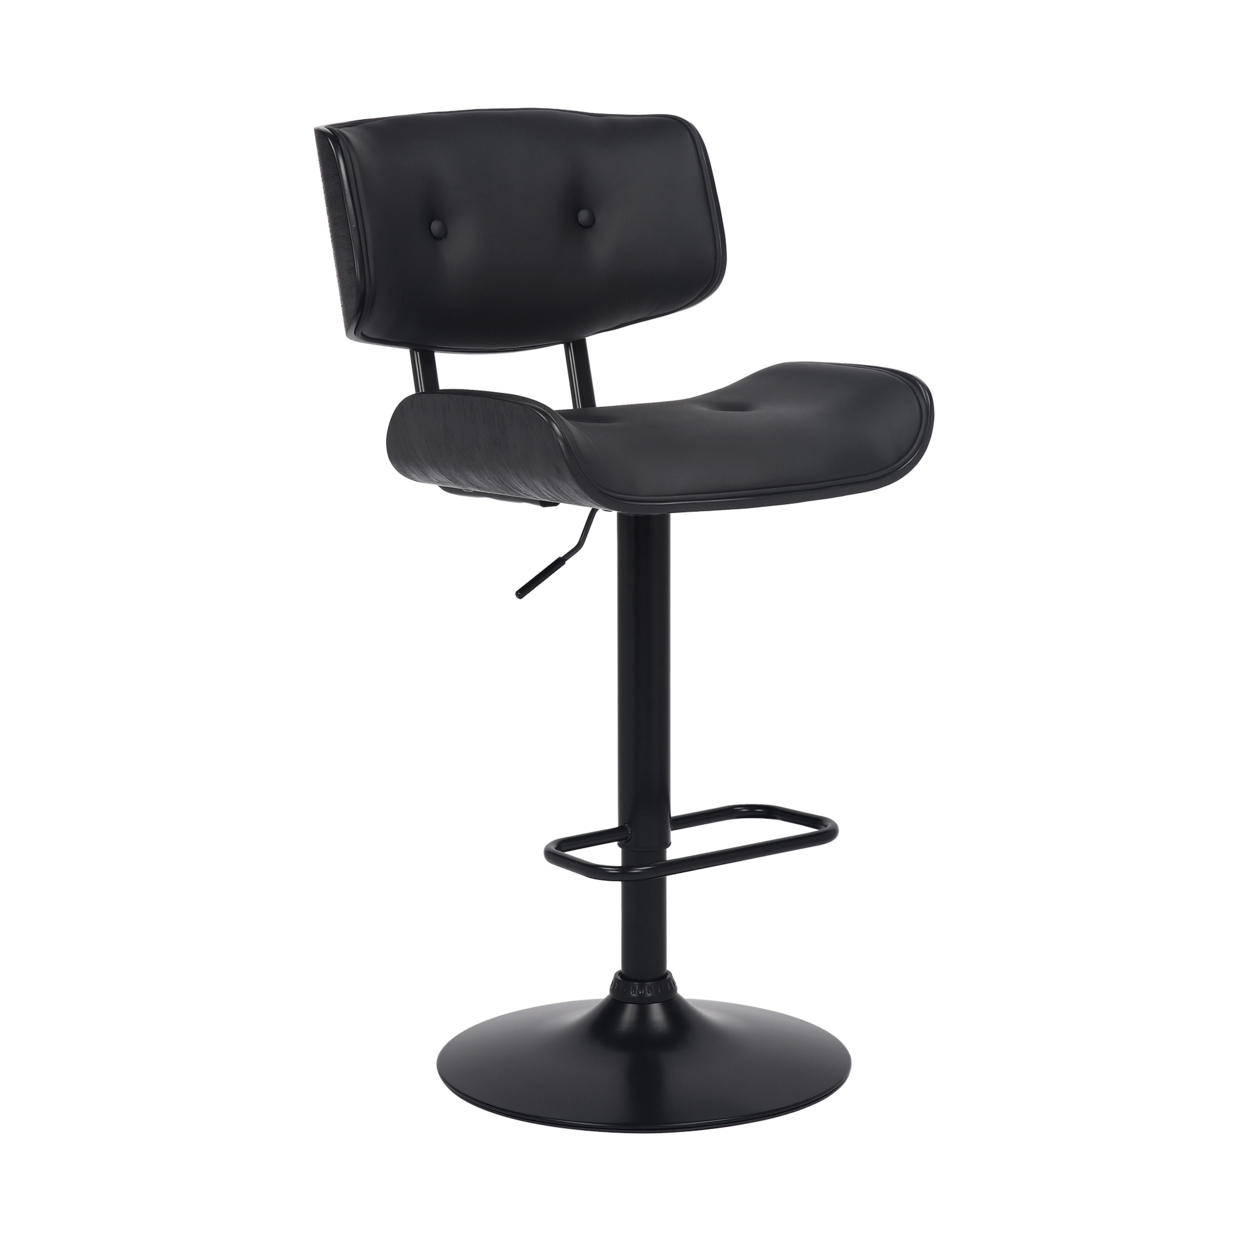 Bar Stool With Leatherette Button Tufted Back And Seat, Black- Saltoro Sherpi